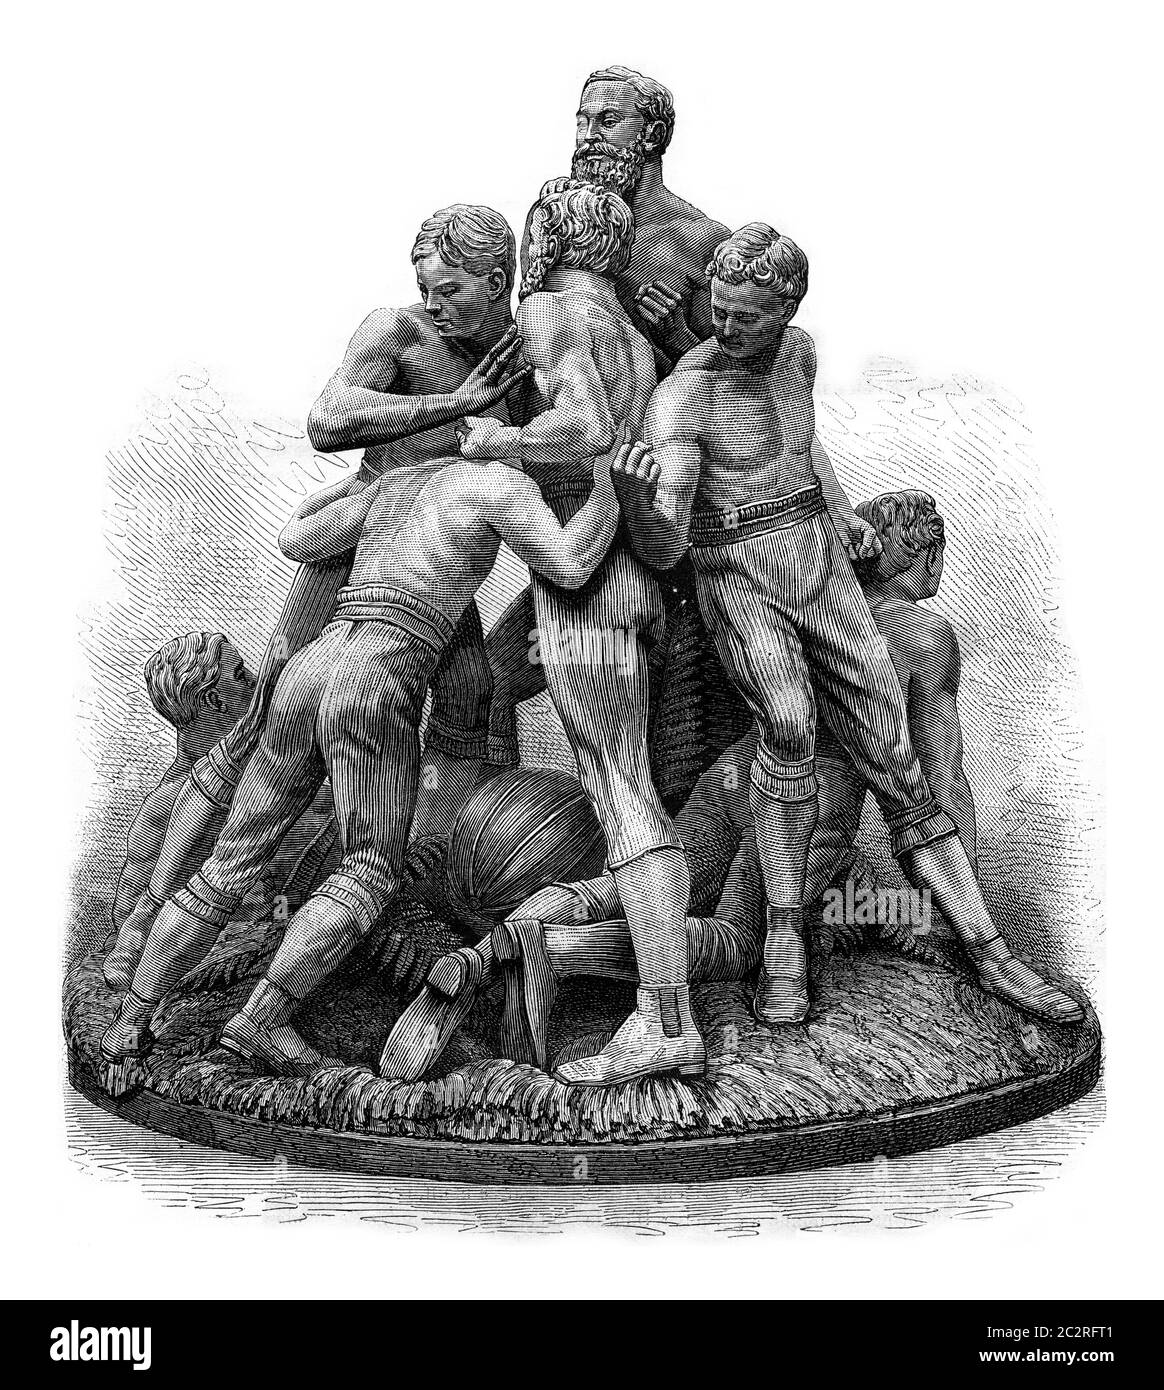 The game of football in England, terracotta group, Tinworth, vintage engraved illustration. Magasin Pittoresque 1880. Stock Photo